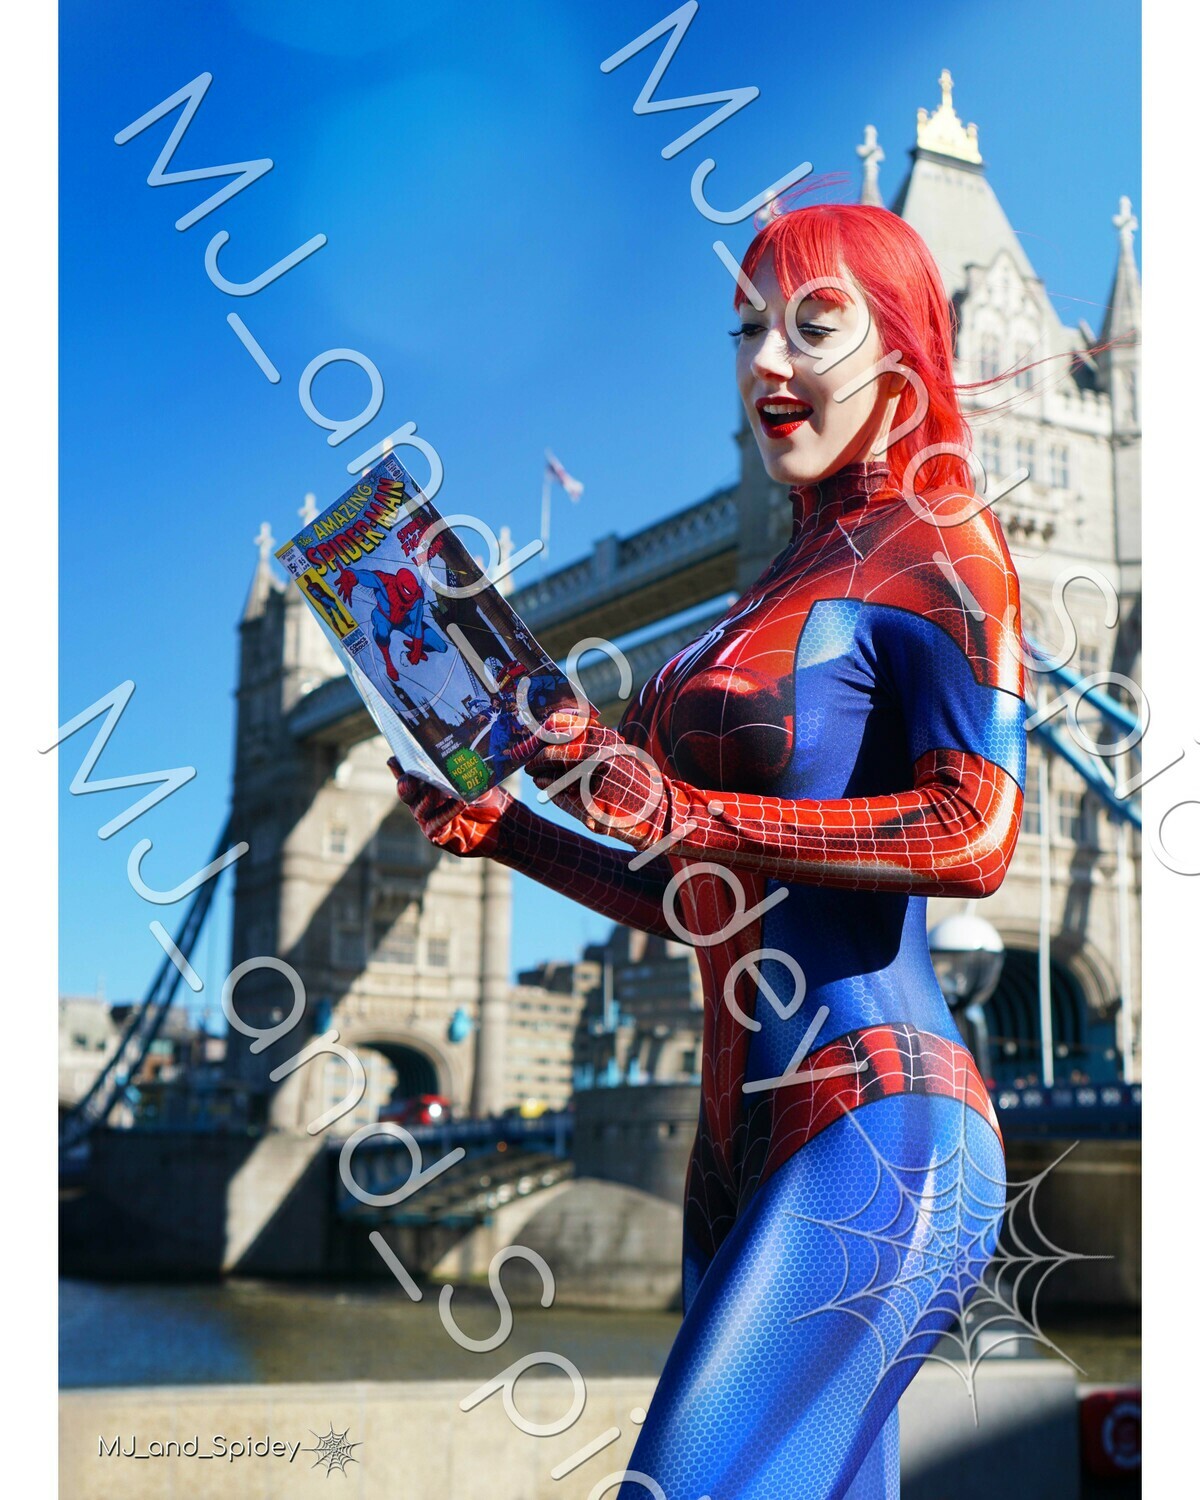 Marvel - Spider-Man - Mary Jane Watson - Classic Spider-Suit - UK 1 - Cosplay Print (@MJ_and_Spidey, MJ and Spidey, Comics)